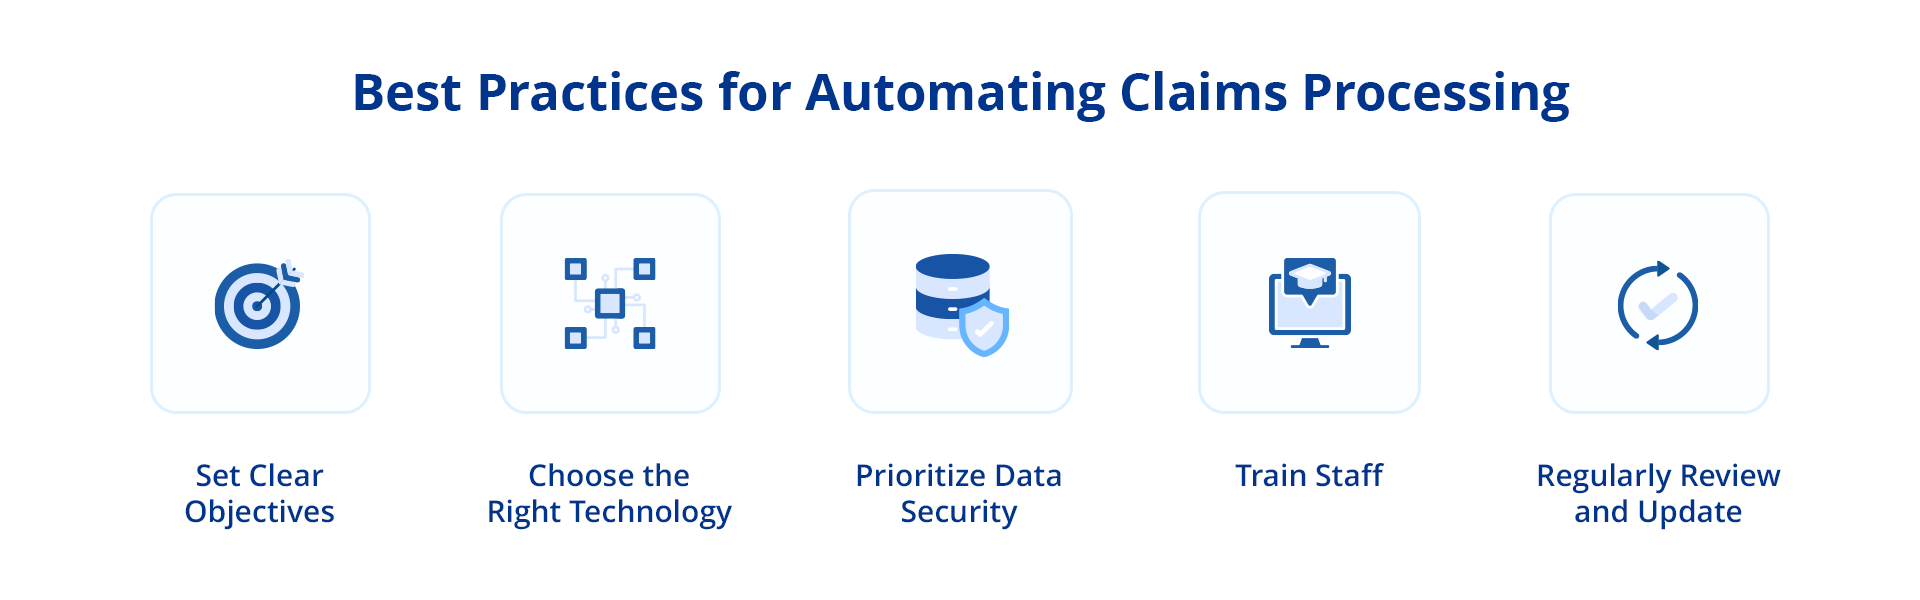 Best Practices for Automating Claims Processing